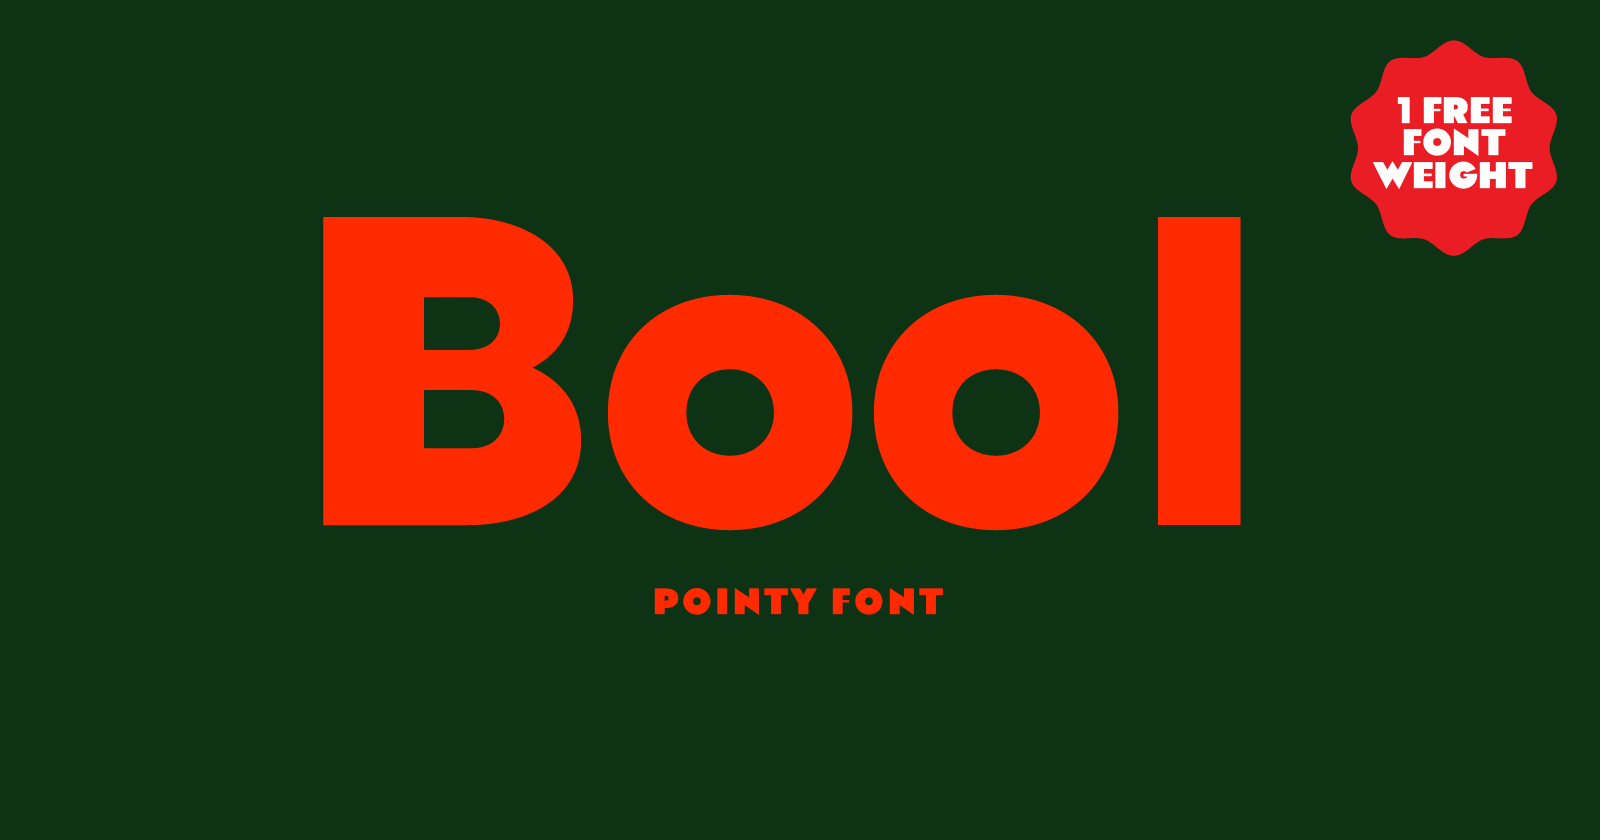 Bool, pointy font in Hello Kitty logo style